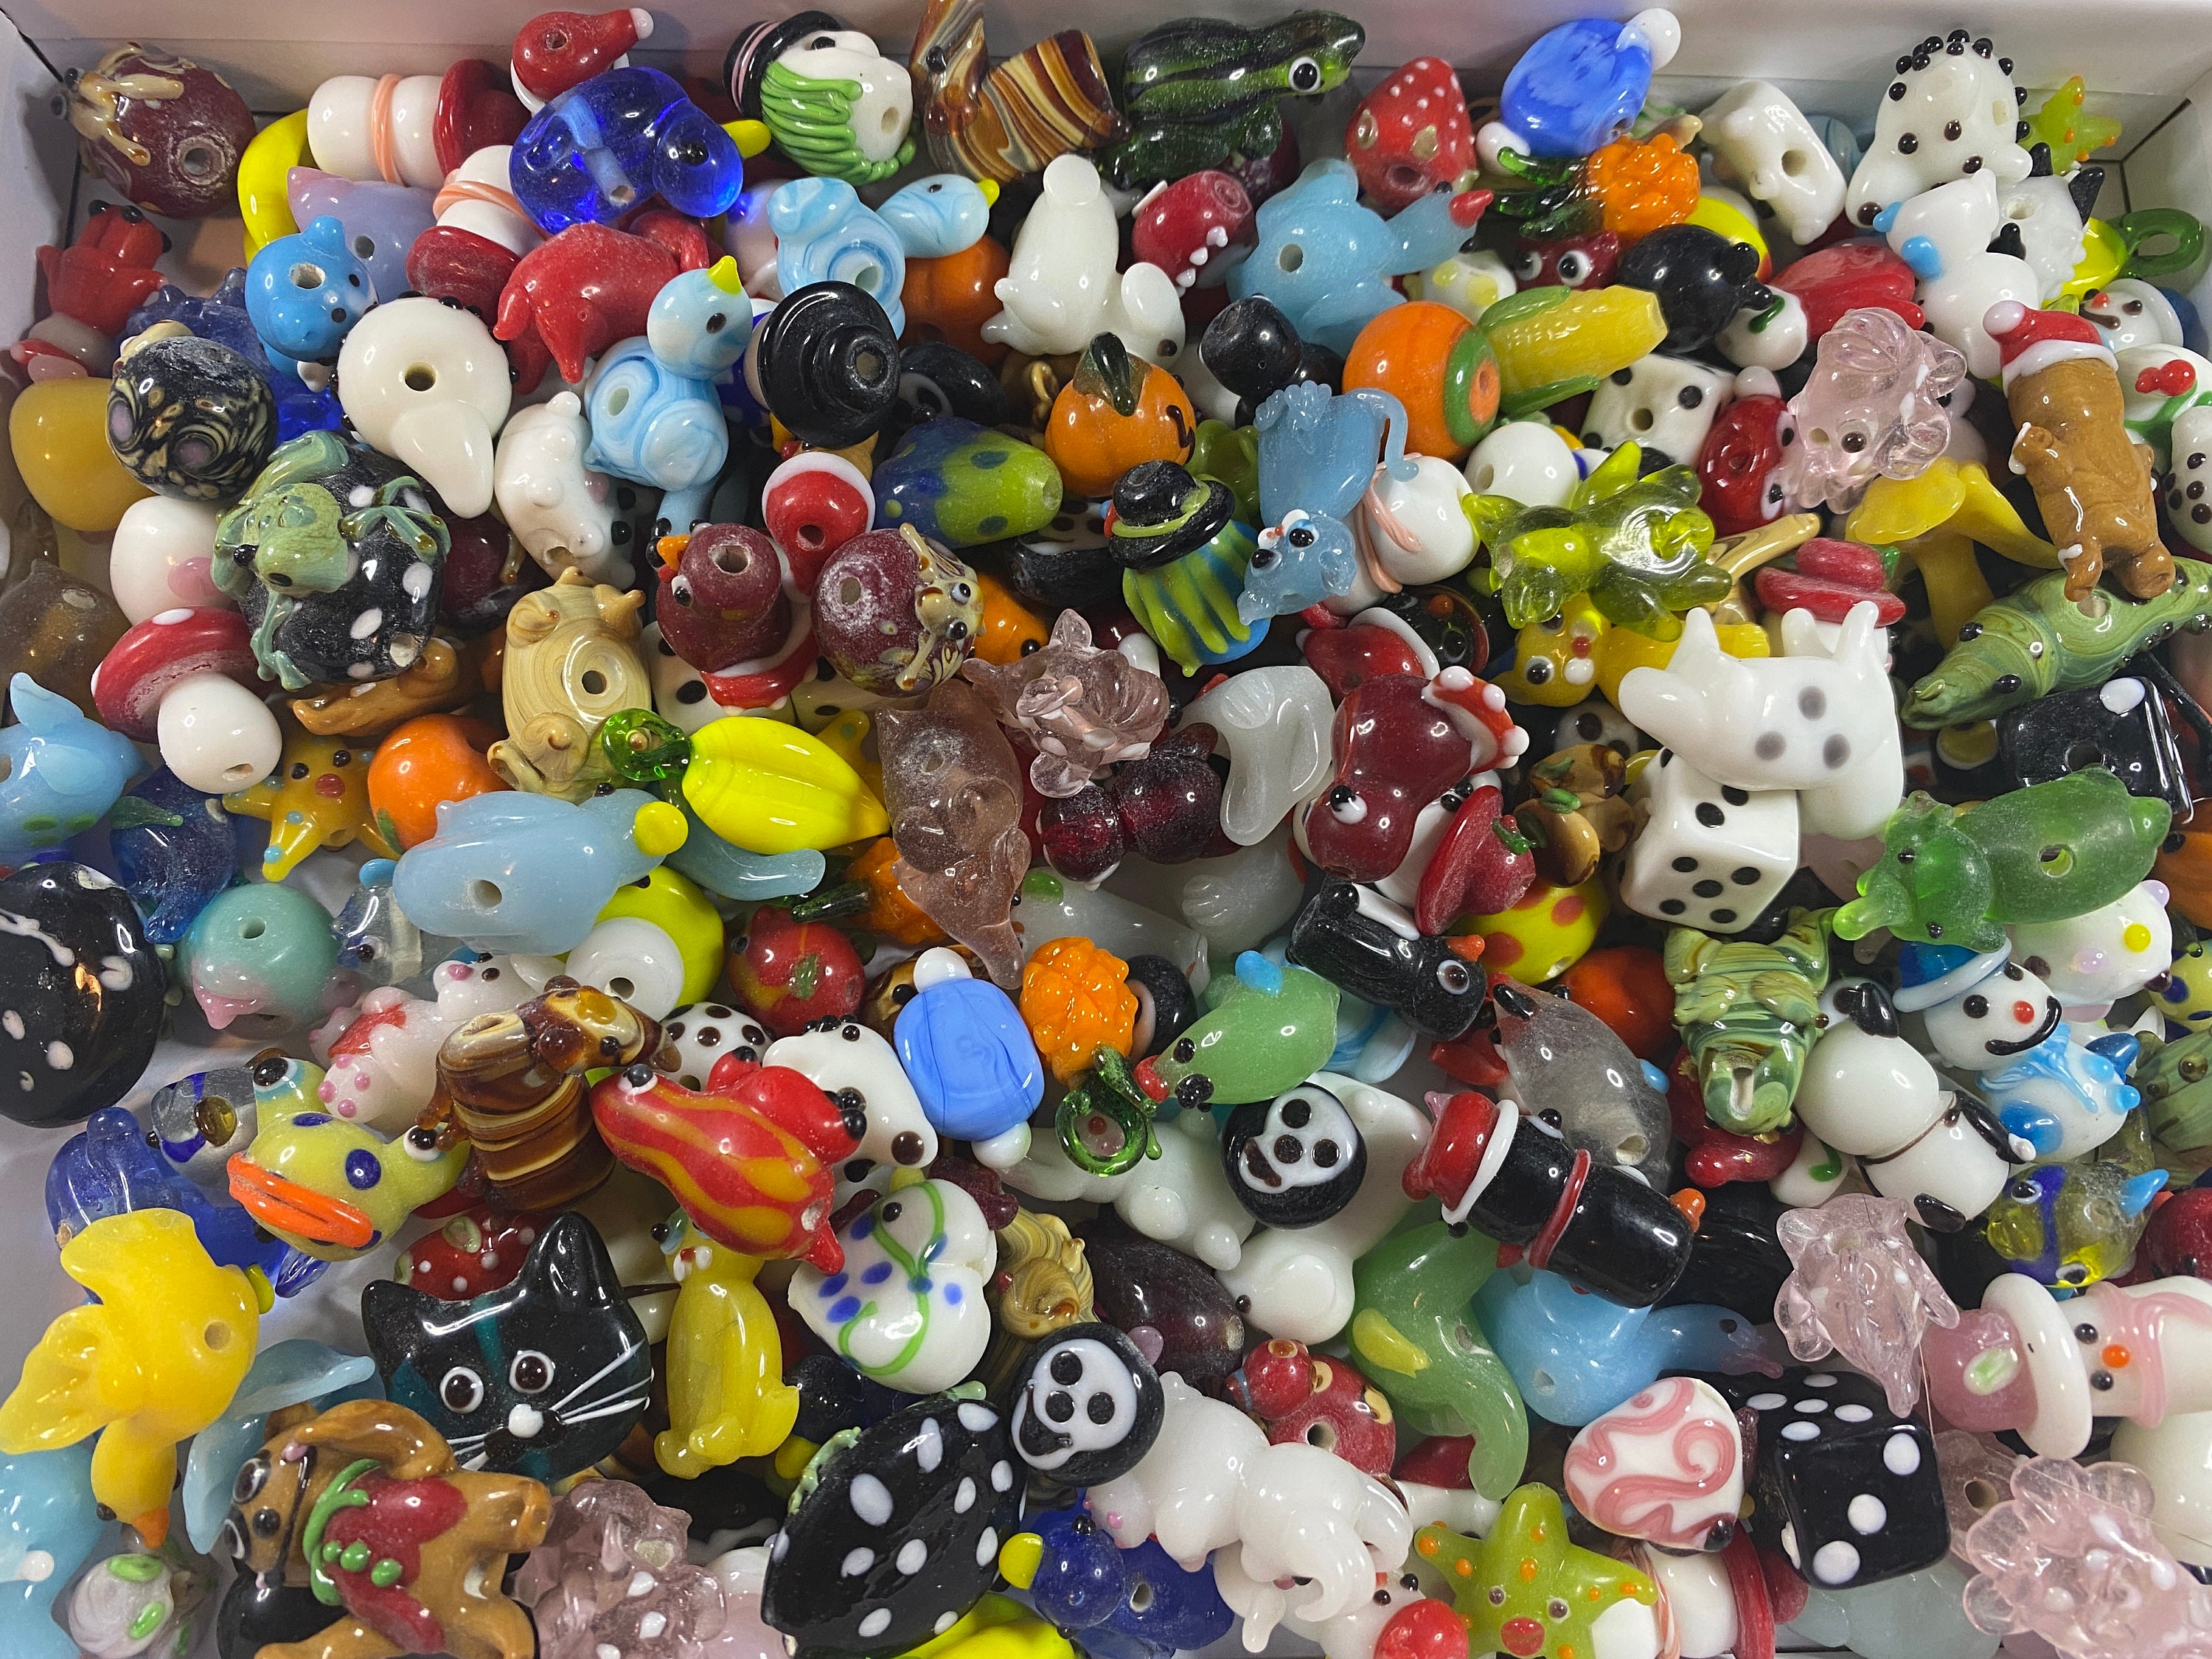  Fun-Weevz 100 Assorted Glass Beads for Jewelry Making